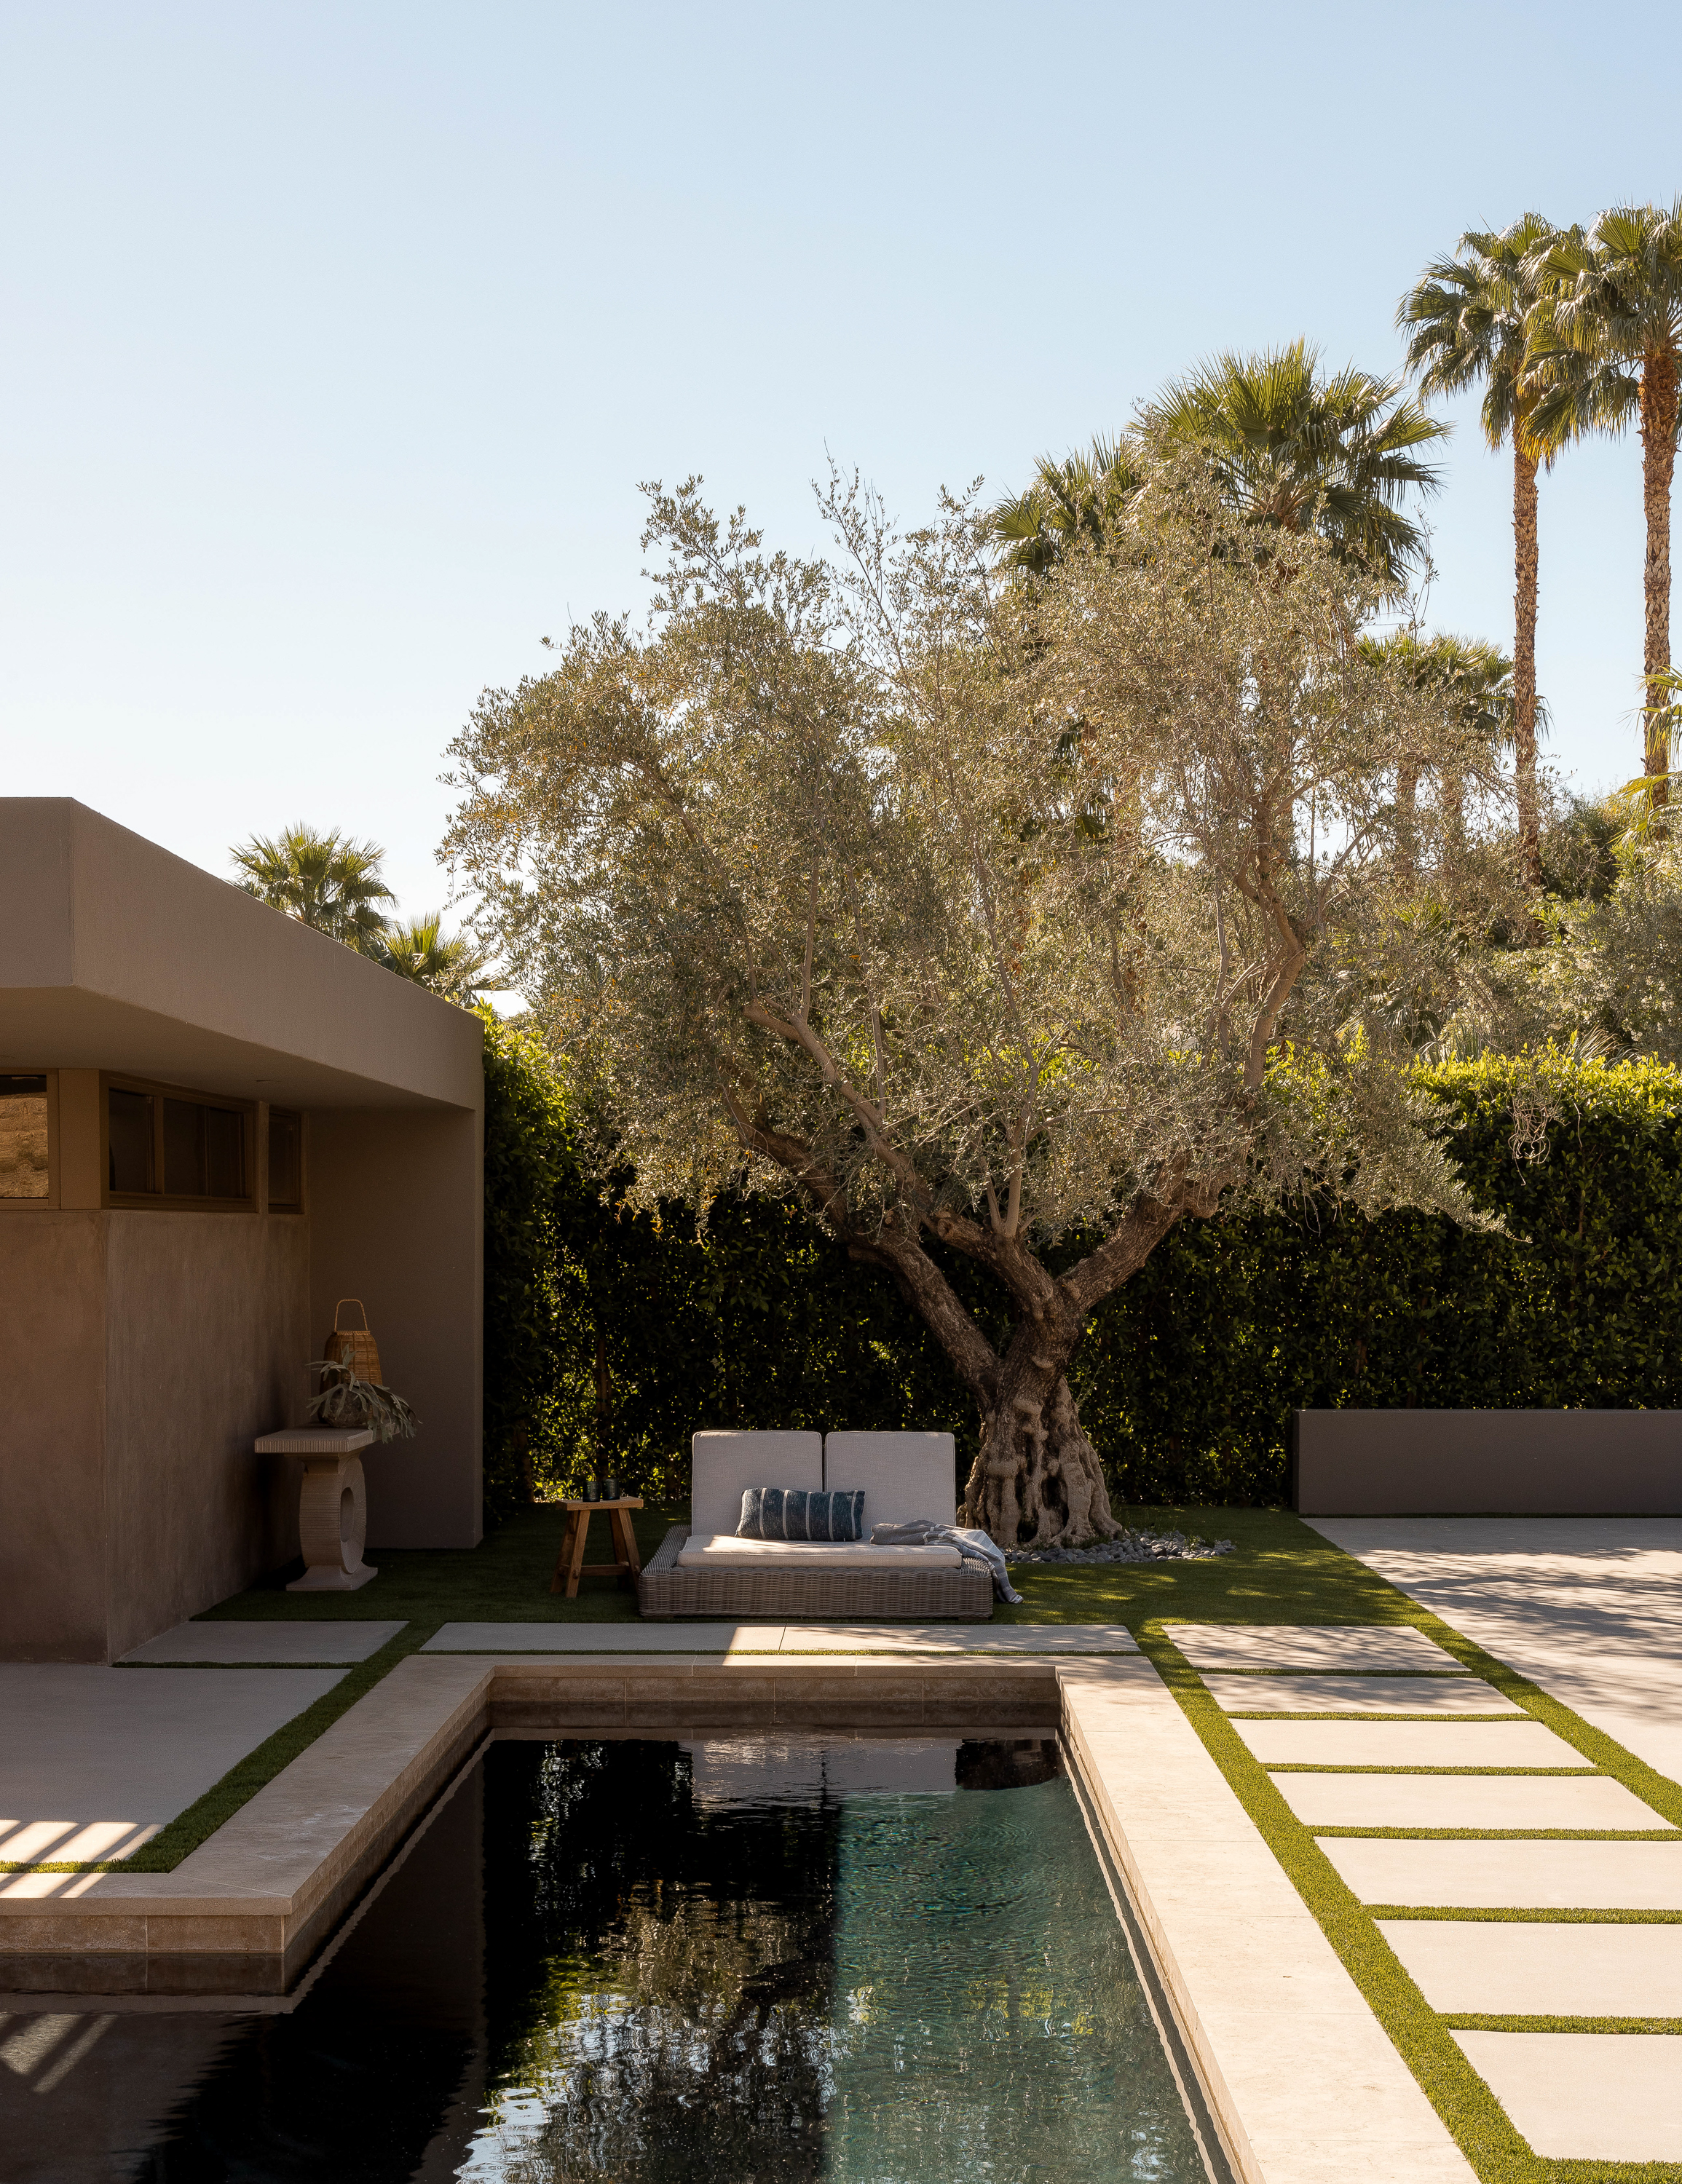 Quiet corner of the courtyard at Palm Springs Retreat: An olive tree stands majestically next to a double chaise lounge, offering a serene and secluded spot for relaxation and contemplation